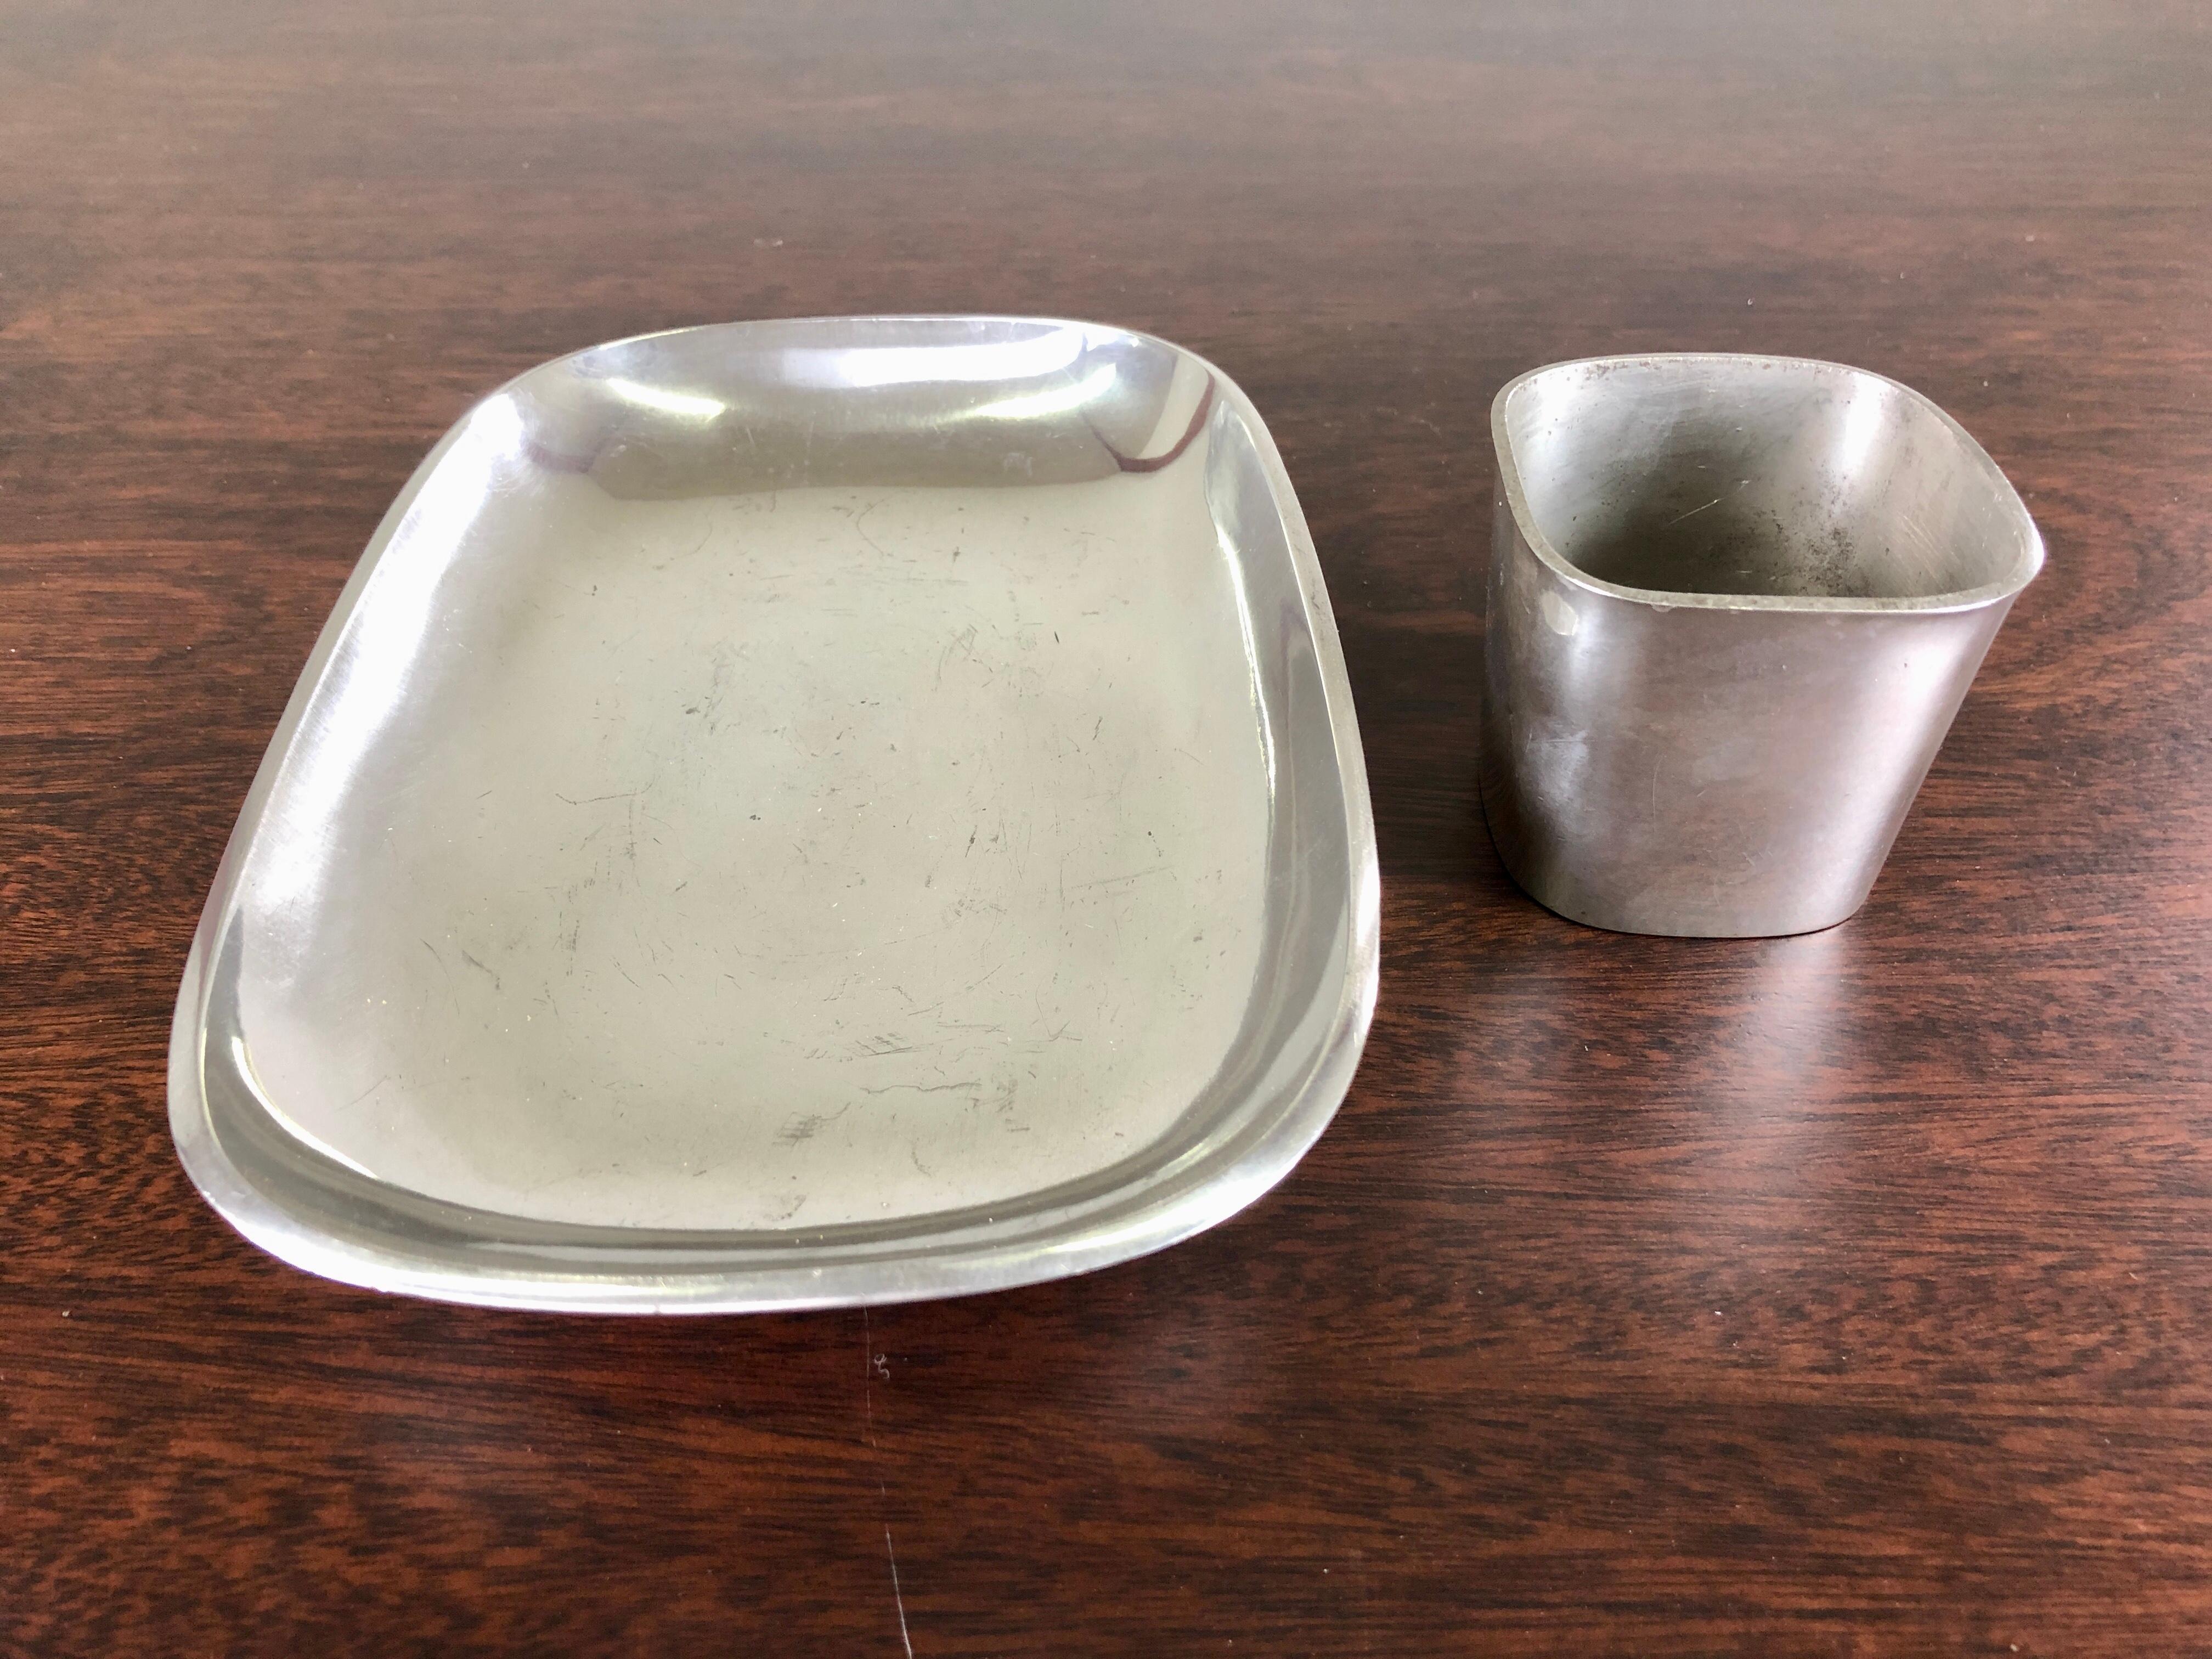 Set of Danish Just Andersen pewter serving platter and bowl produced by Just Andersen A/S in the 1940´s / 1950´s

The the serving platter and bowl are good vintage condition and marked with Just. Andersens triangle mark. 

Seizes cm. /